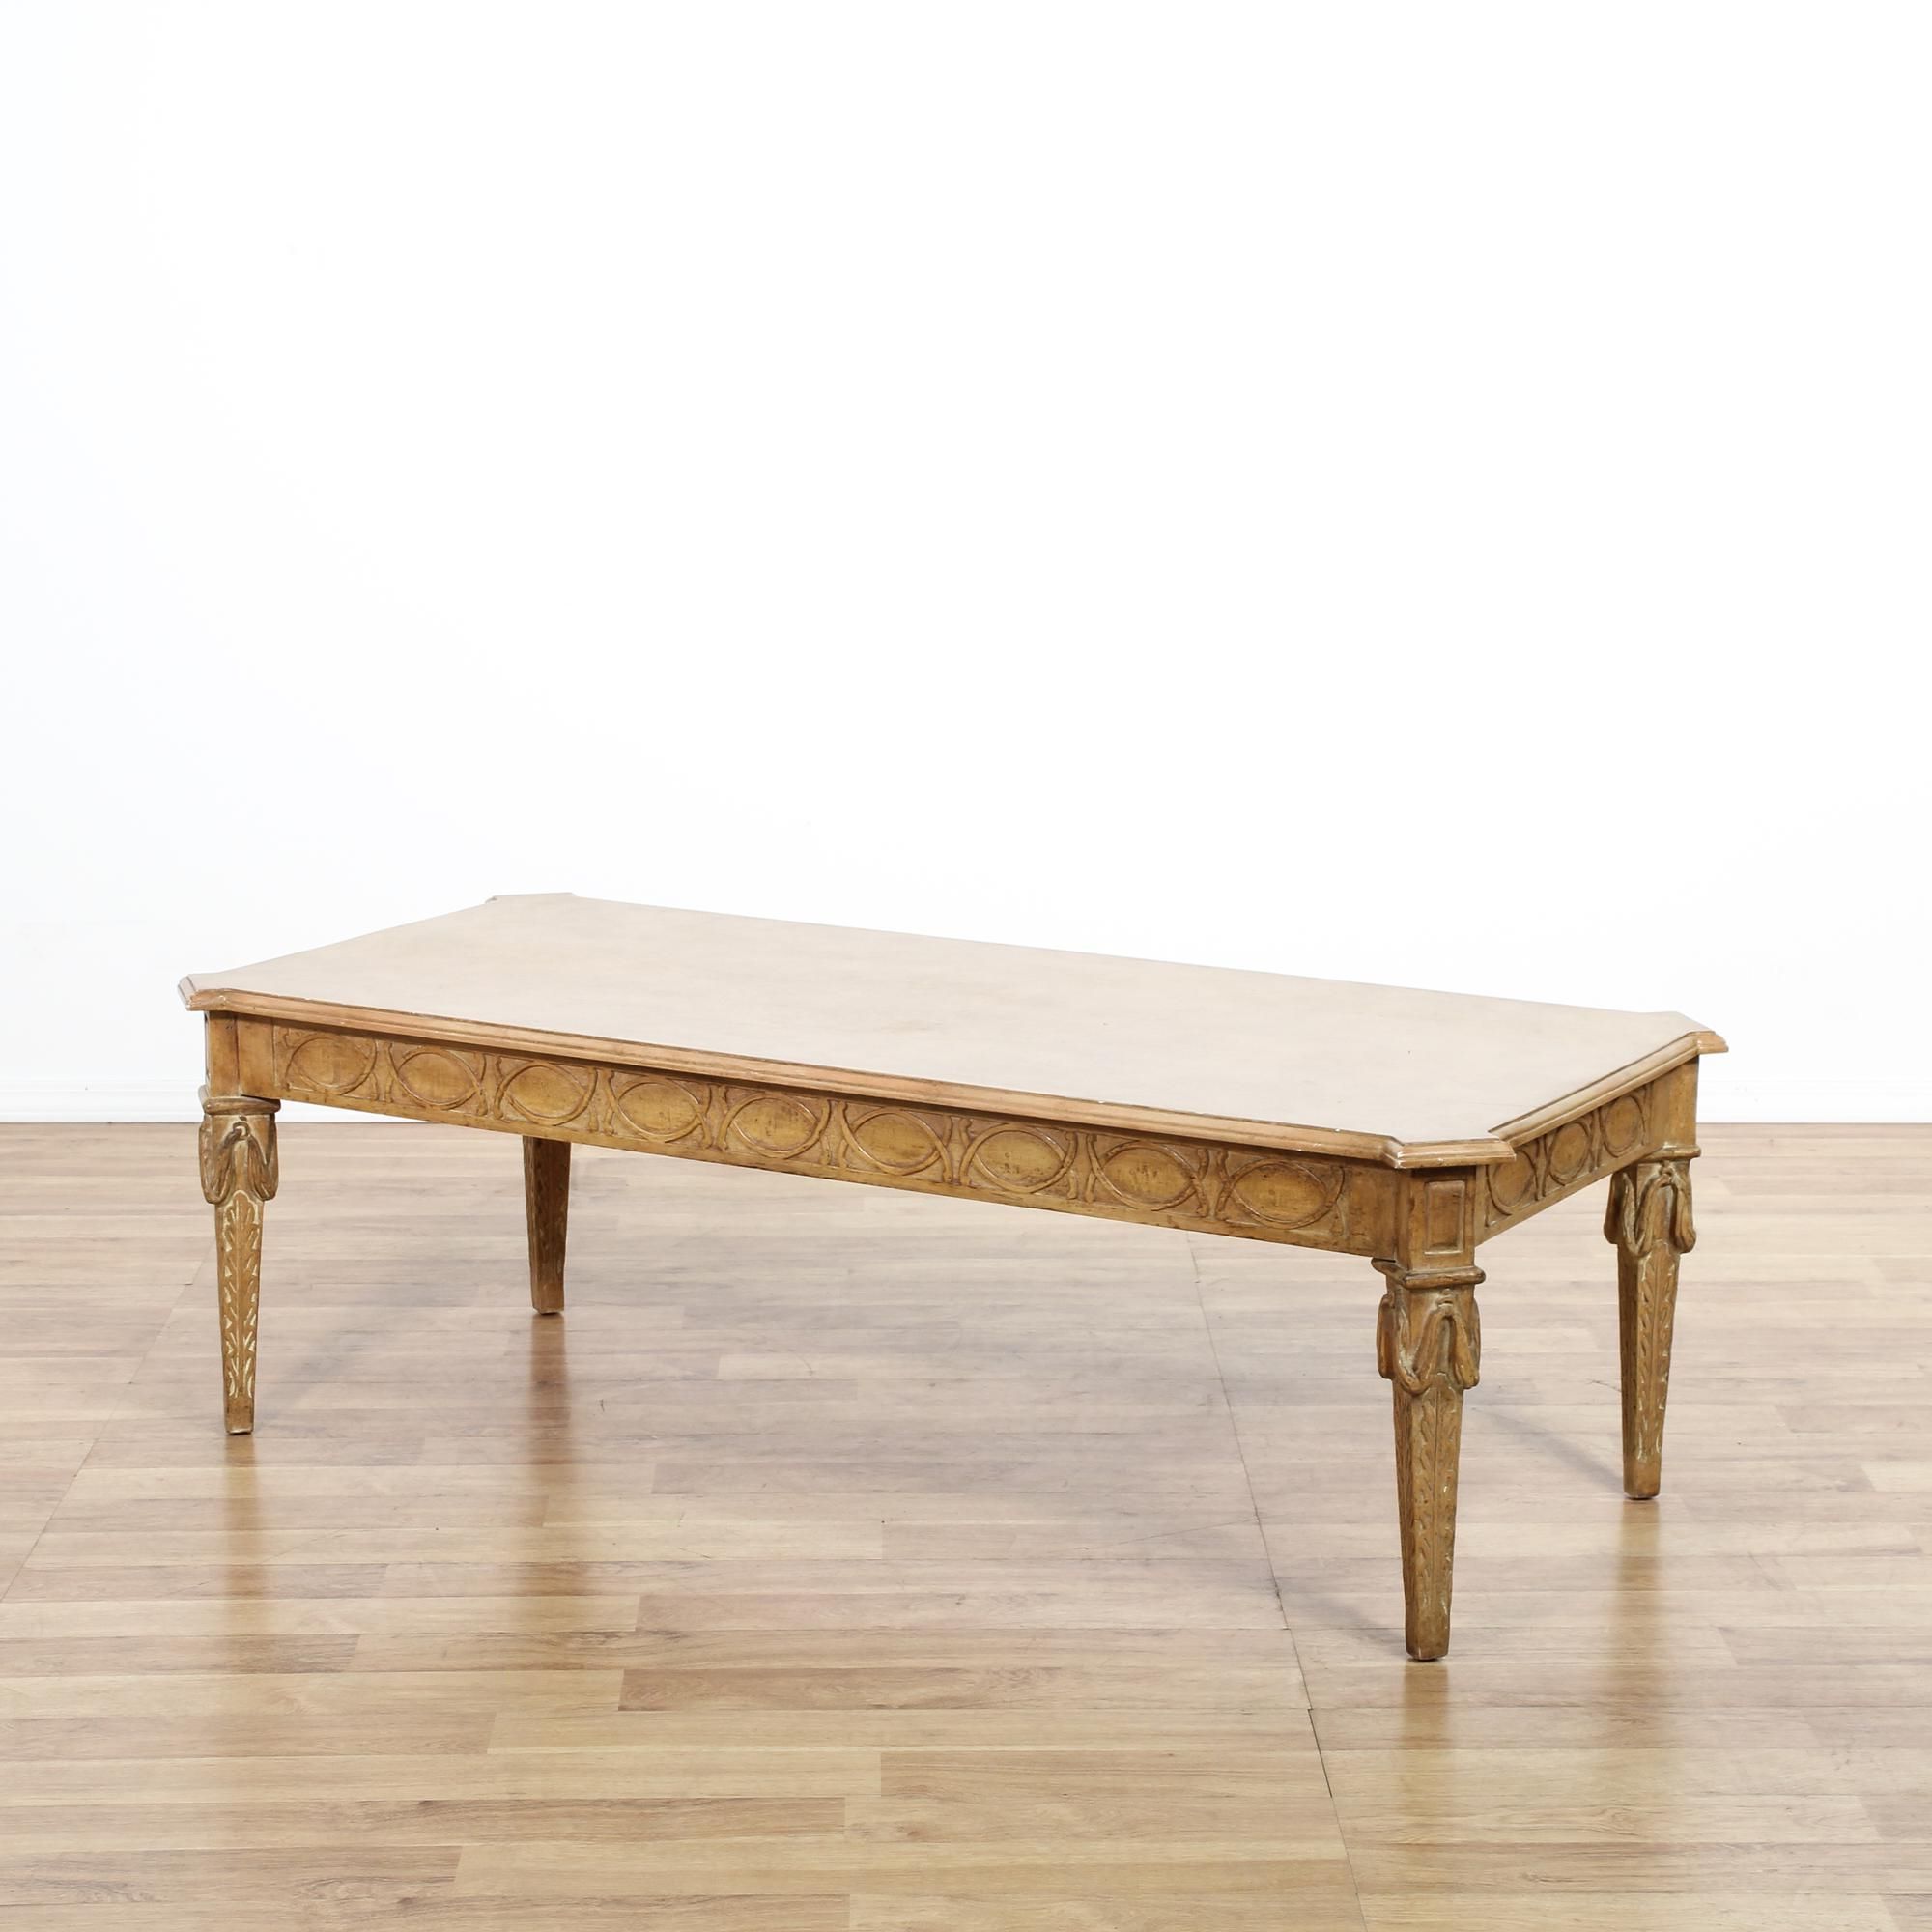 This Carved Coffee Table Is Featured In A Solid Wood With Throughout Latest Oceanside White Washed Coffee Tables (View 3 of 20)